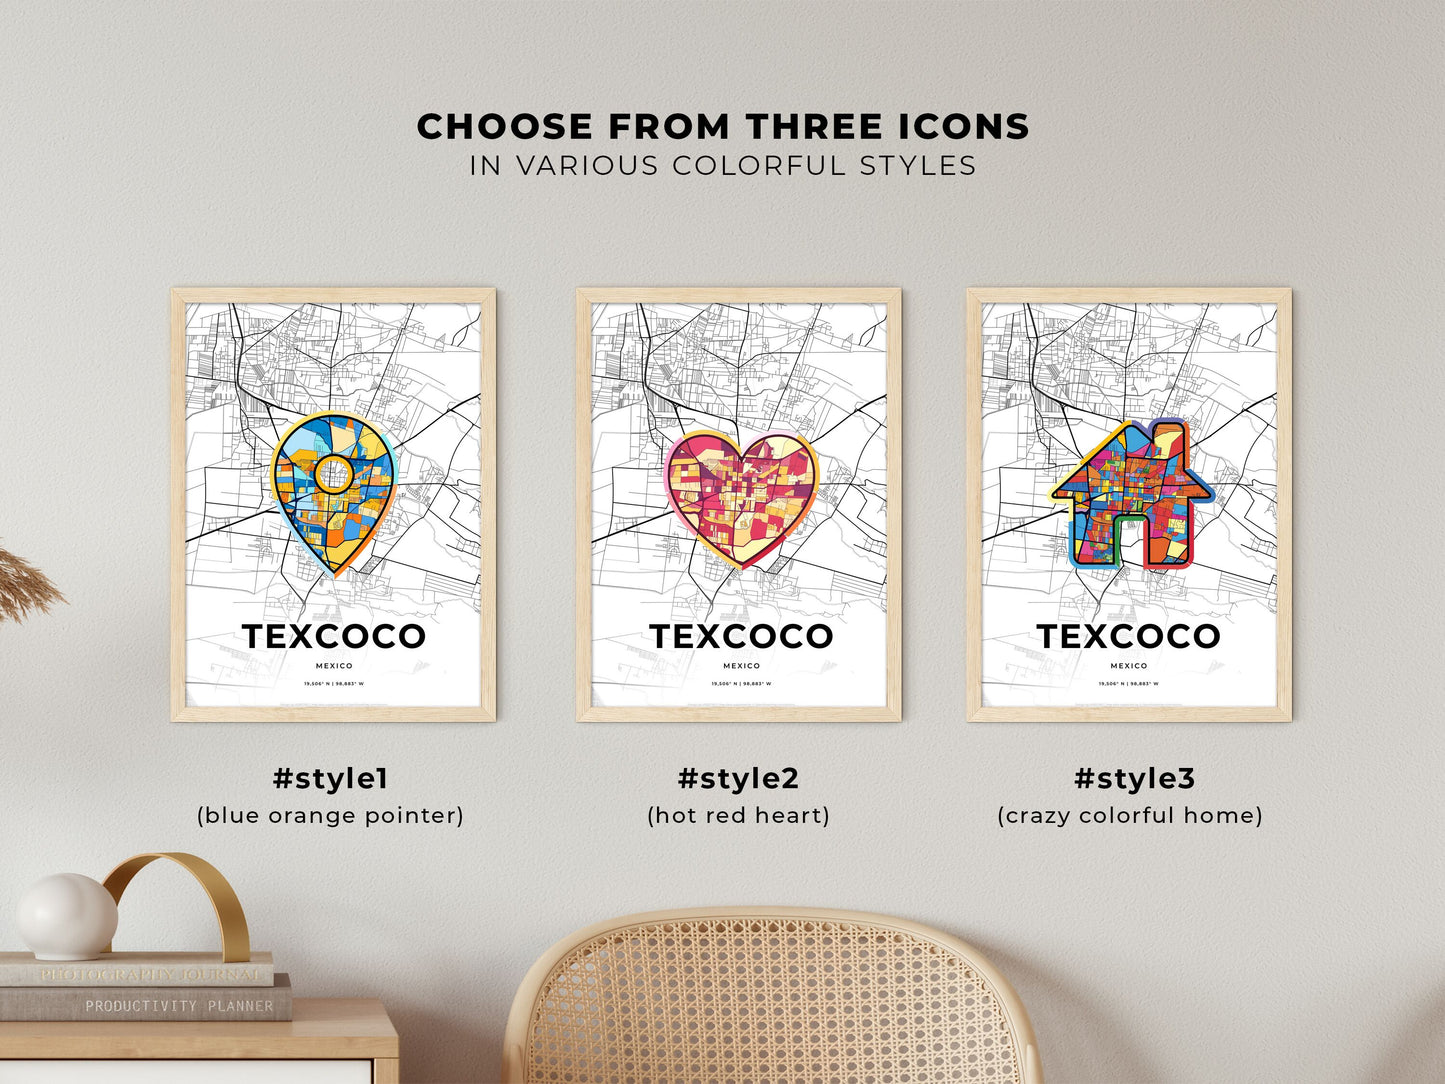 TEXCOCO MEXICO minimal art map with a colorful icon. Where it all began, Couple map gift.